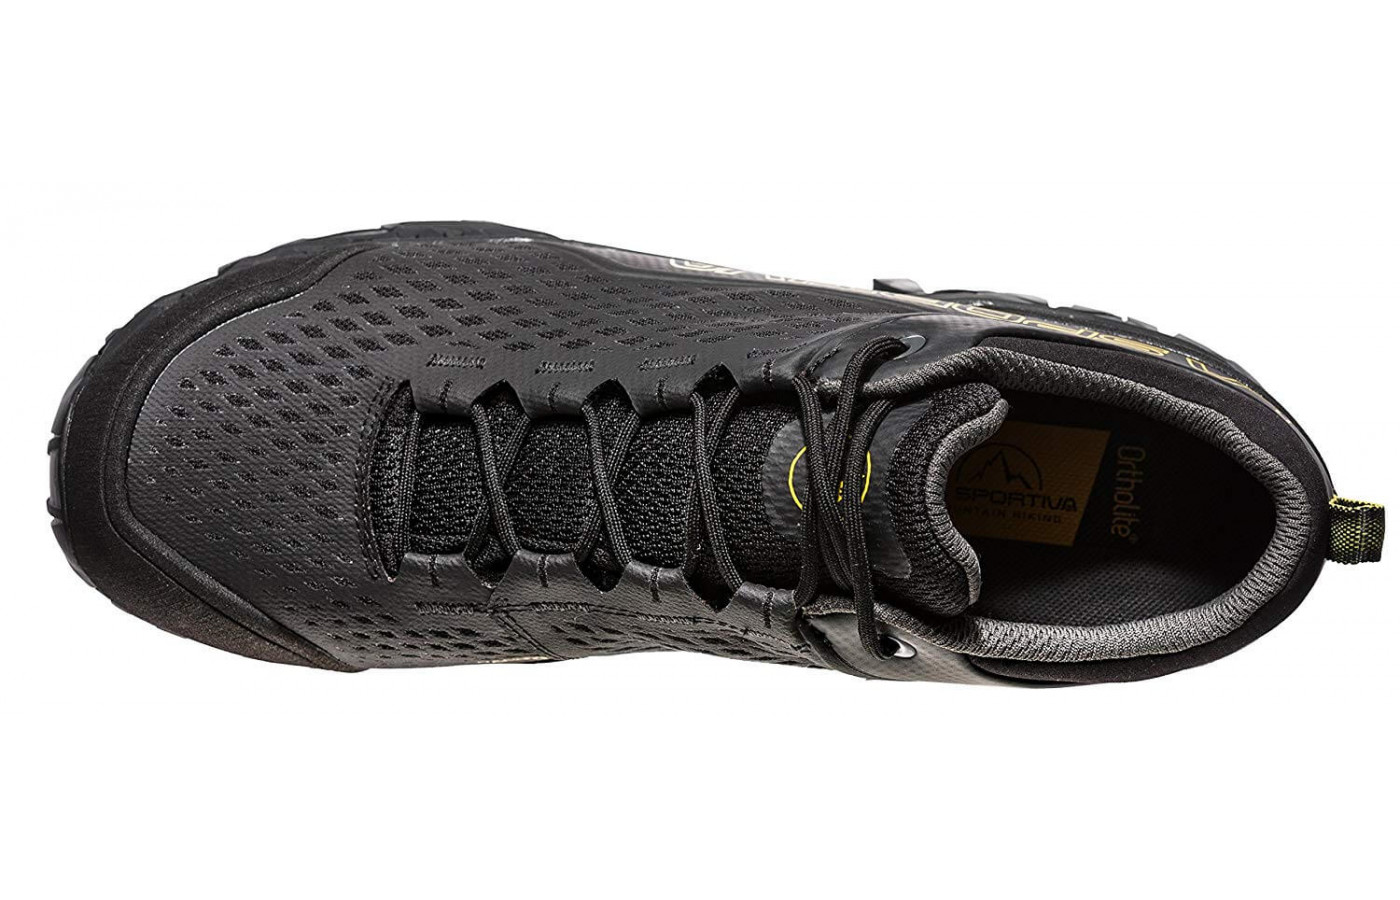 The Spire GTX's upper is abrasion resistant and comes with Gore-Tex Surround 